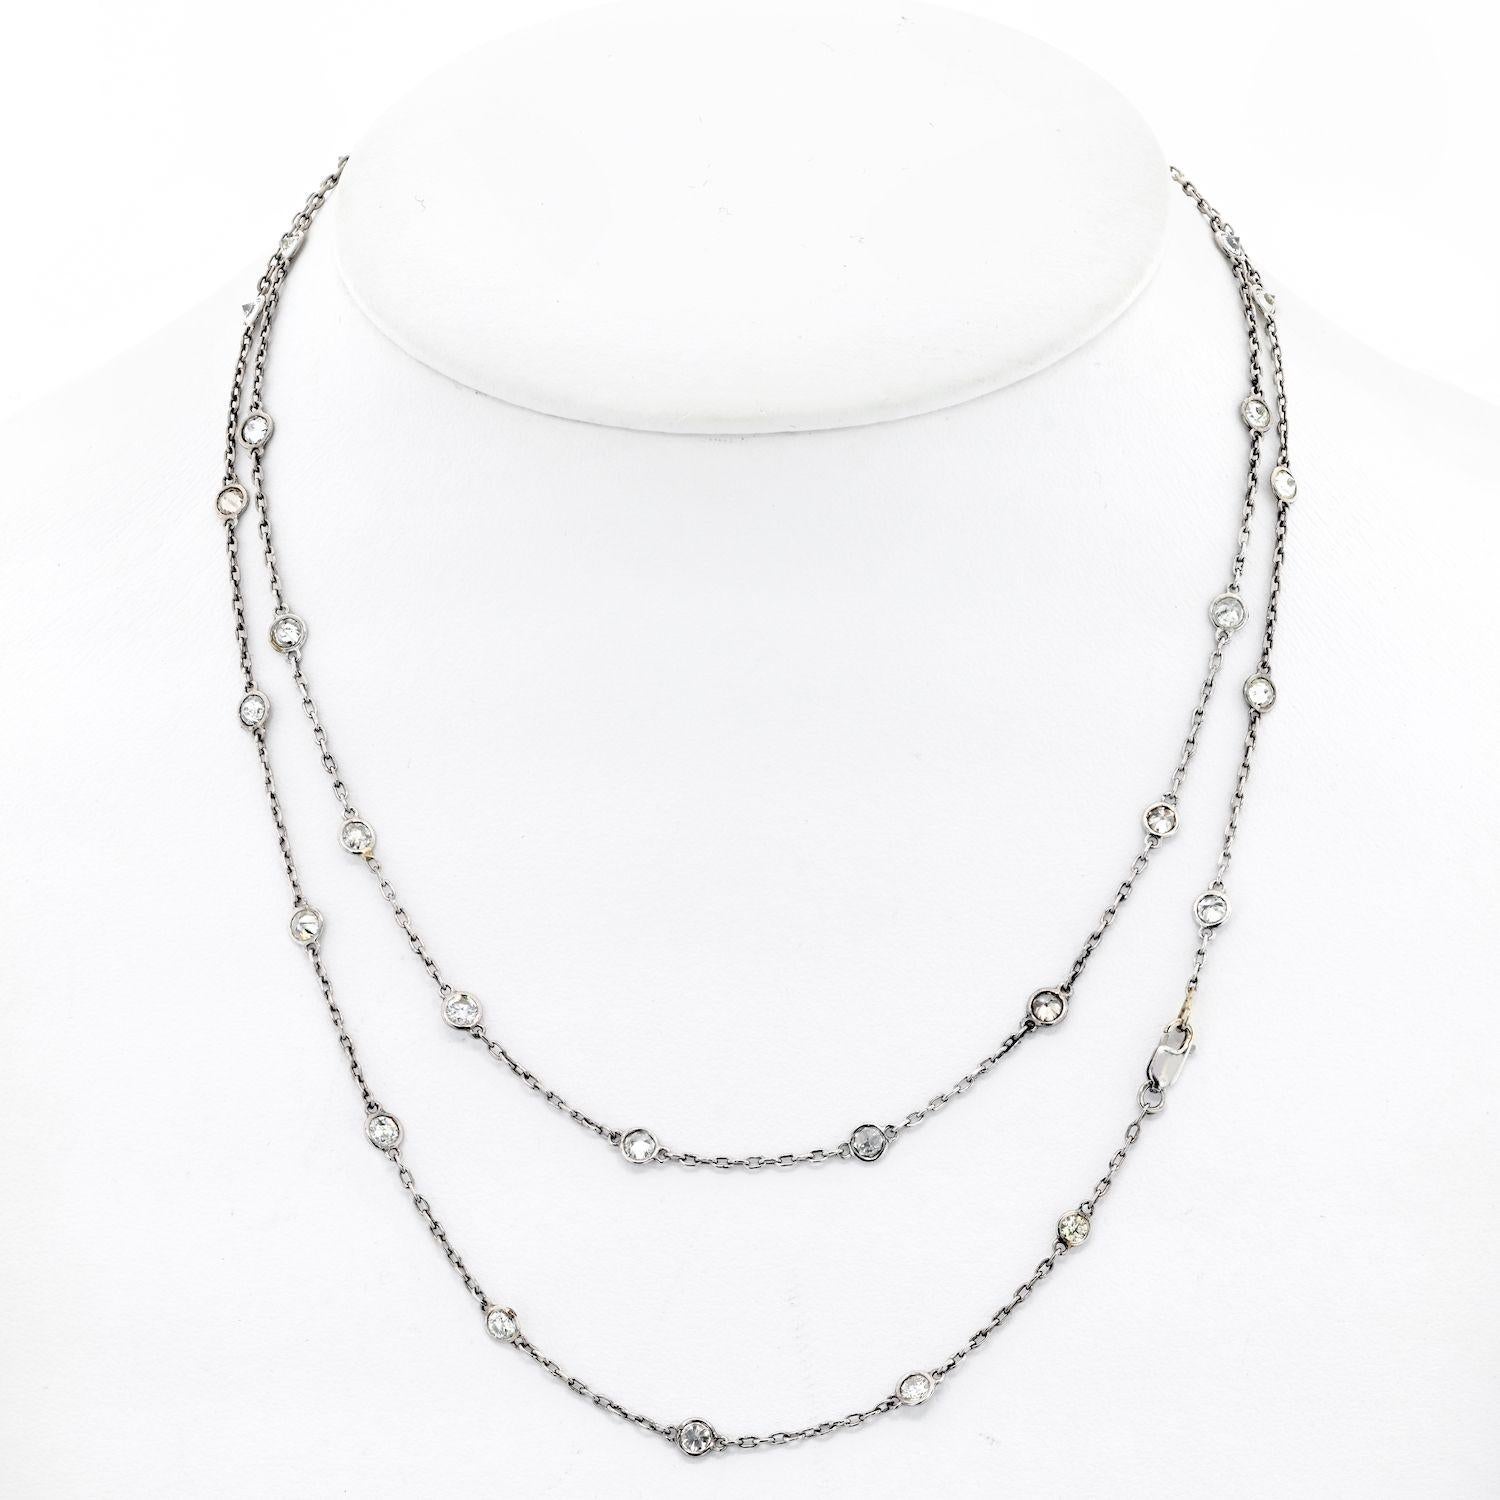 The diamond by the yard chain necklace is a delicate and elegant piece of jewelry that exudes understated luxury. Measuring 34 inches in length, this chain necklace is long enough to be worn on its own or layered with other necklaces for a trendy